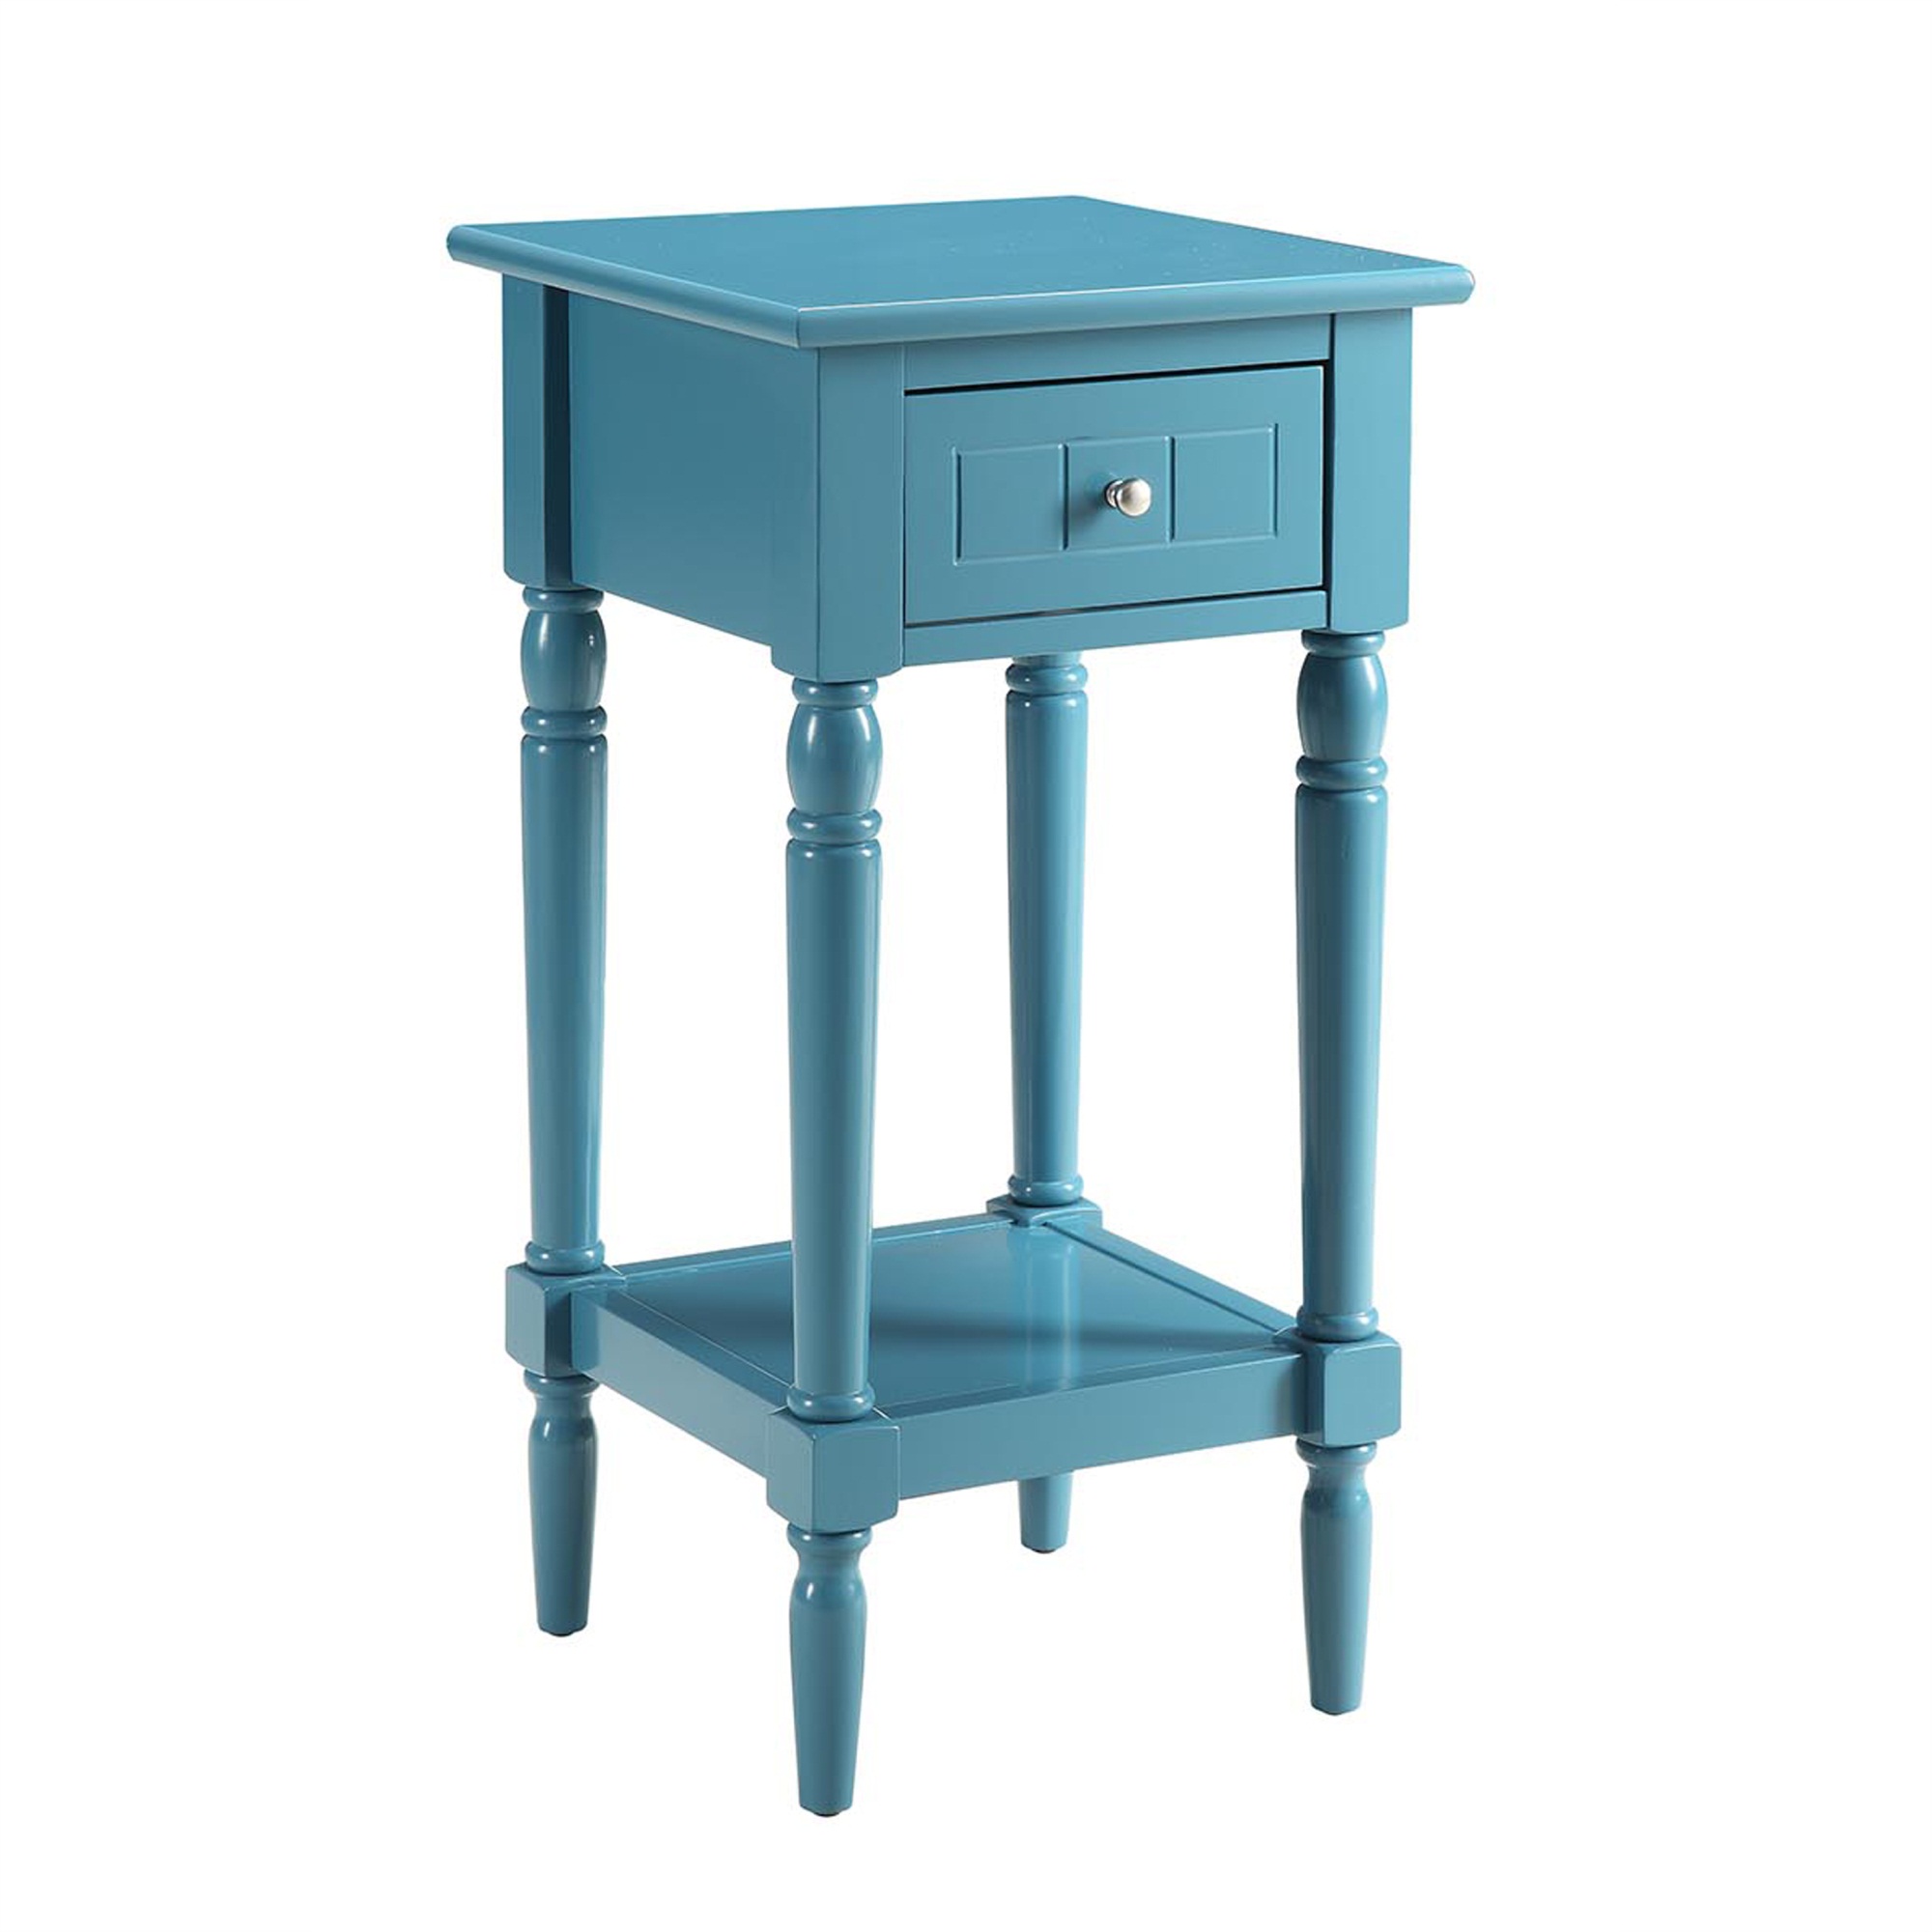 Convenience Concepts French Country Khloe Accent Table, Blue